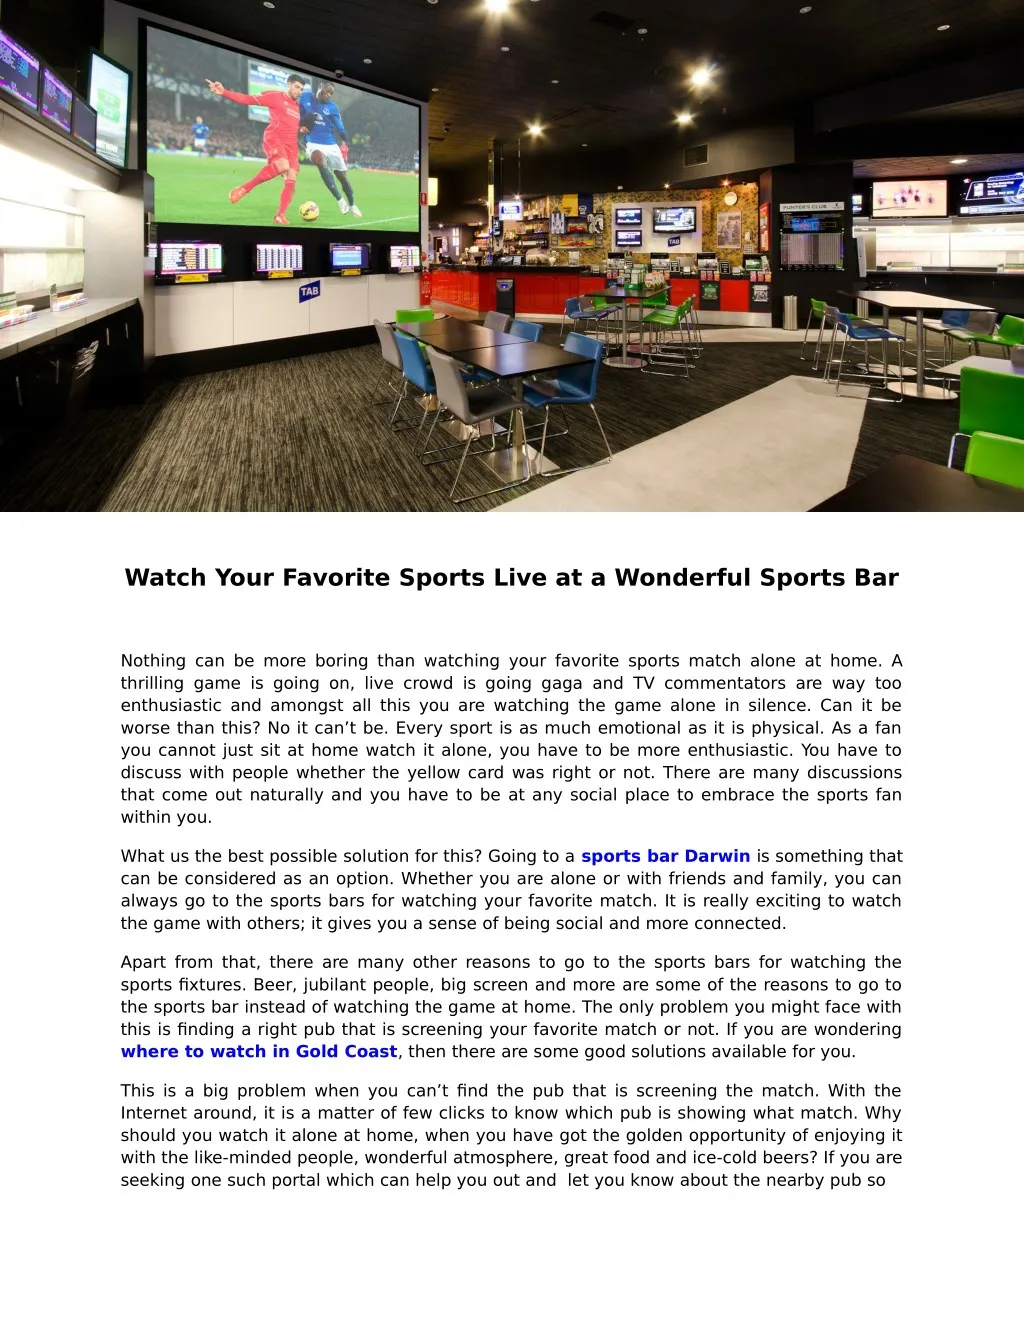 watch your favorite sports live at a wonderful